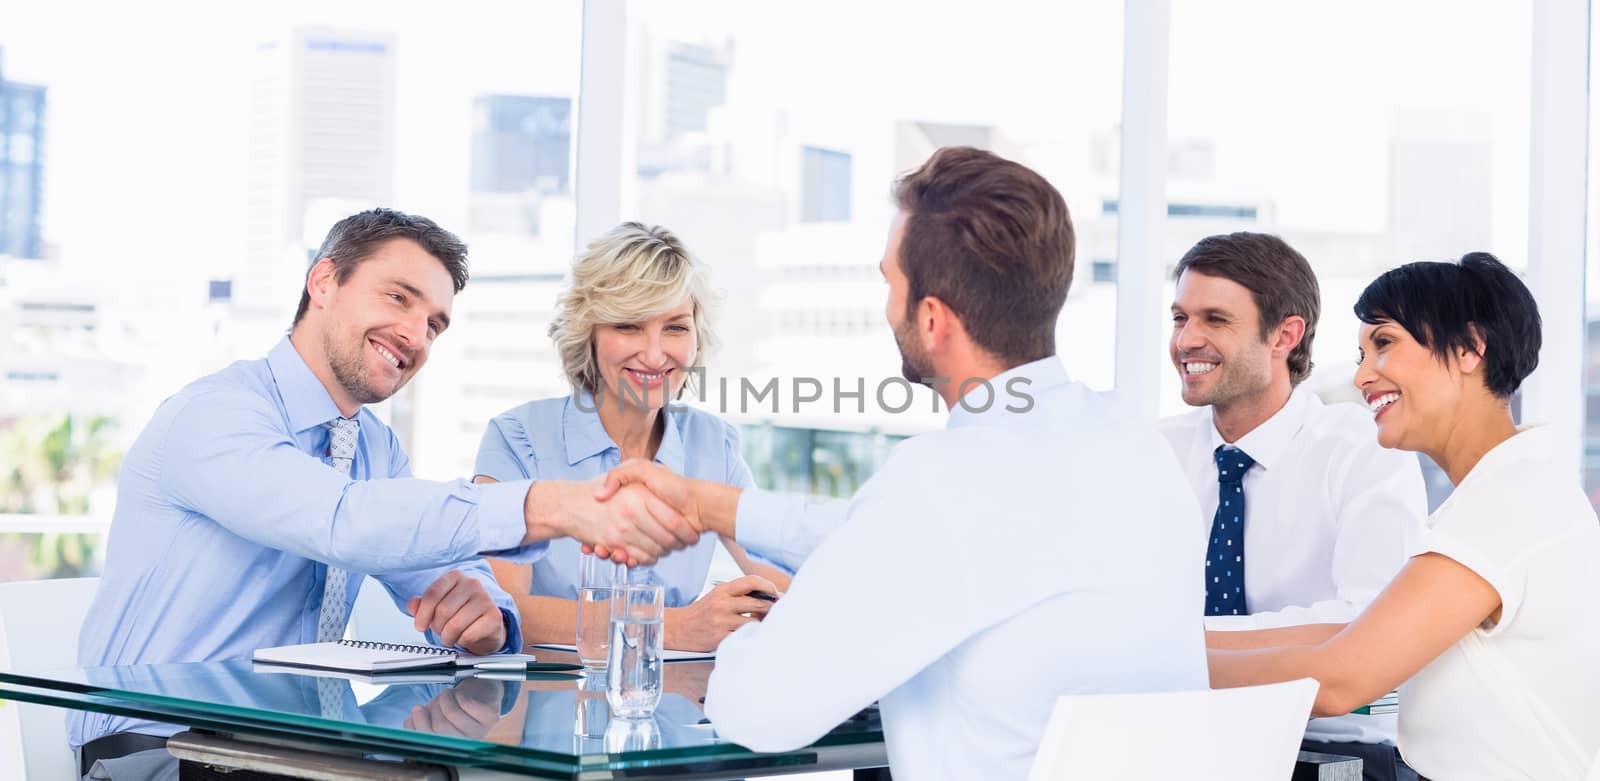 Executives shaking hands during business meeting by Wavebreakmedia